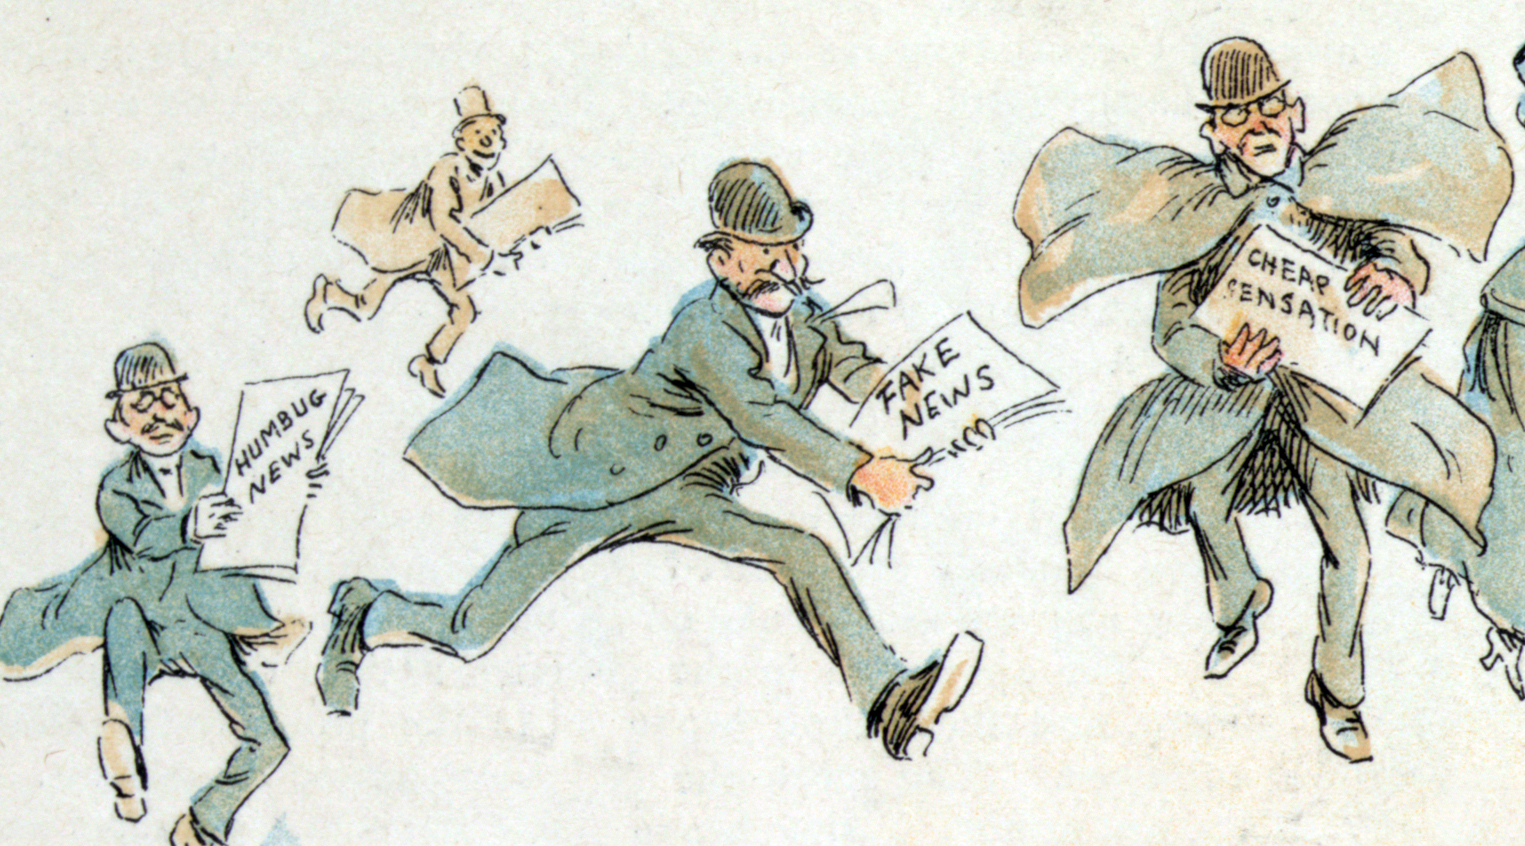 A vintage drawing of three journalists wearing grey suits carrying newspapers. One newspaper says "humbug news", the other says "fake news" and the last says "cheap sensation", indicating the journalists are not writing factual articles but pushing out sensationalistic content for attention. 